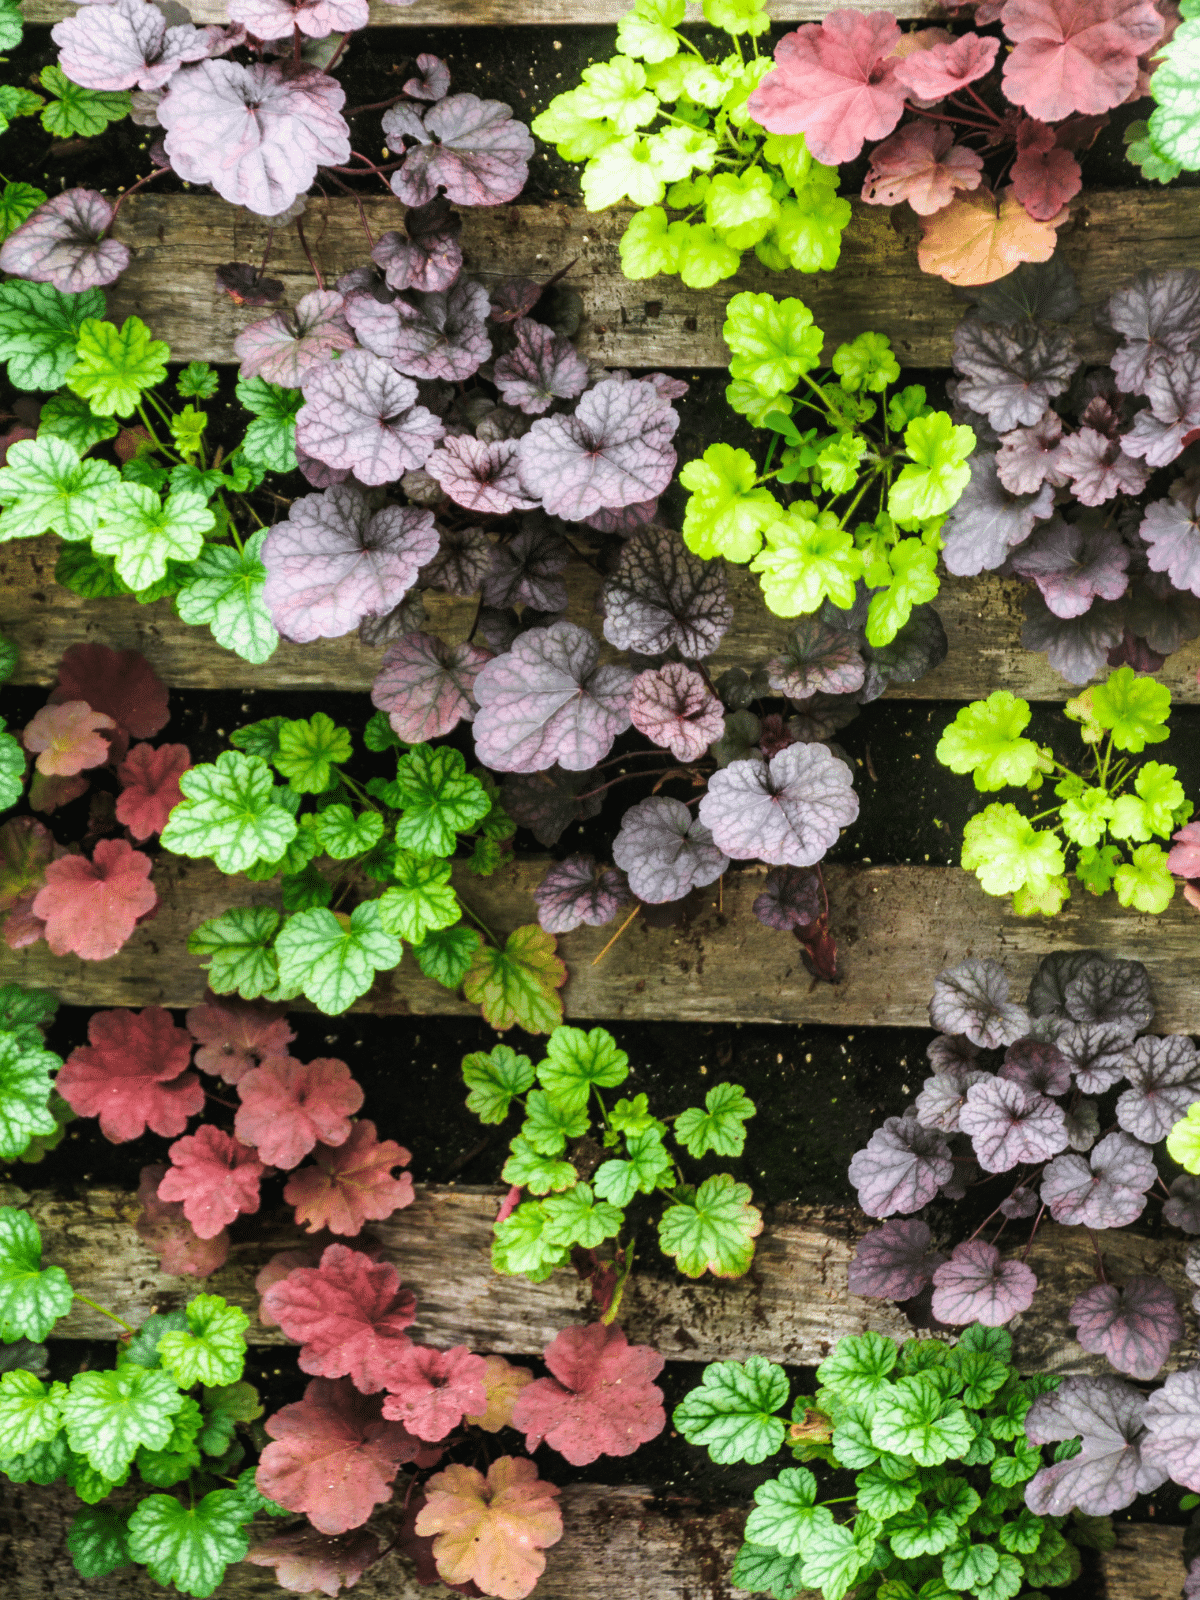 Coral Bells Foliage on a wooden pallet.